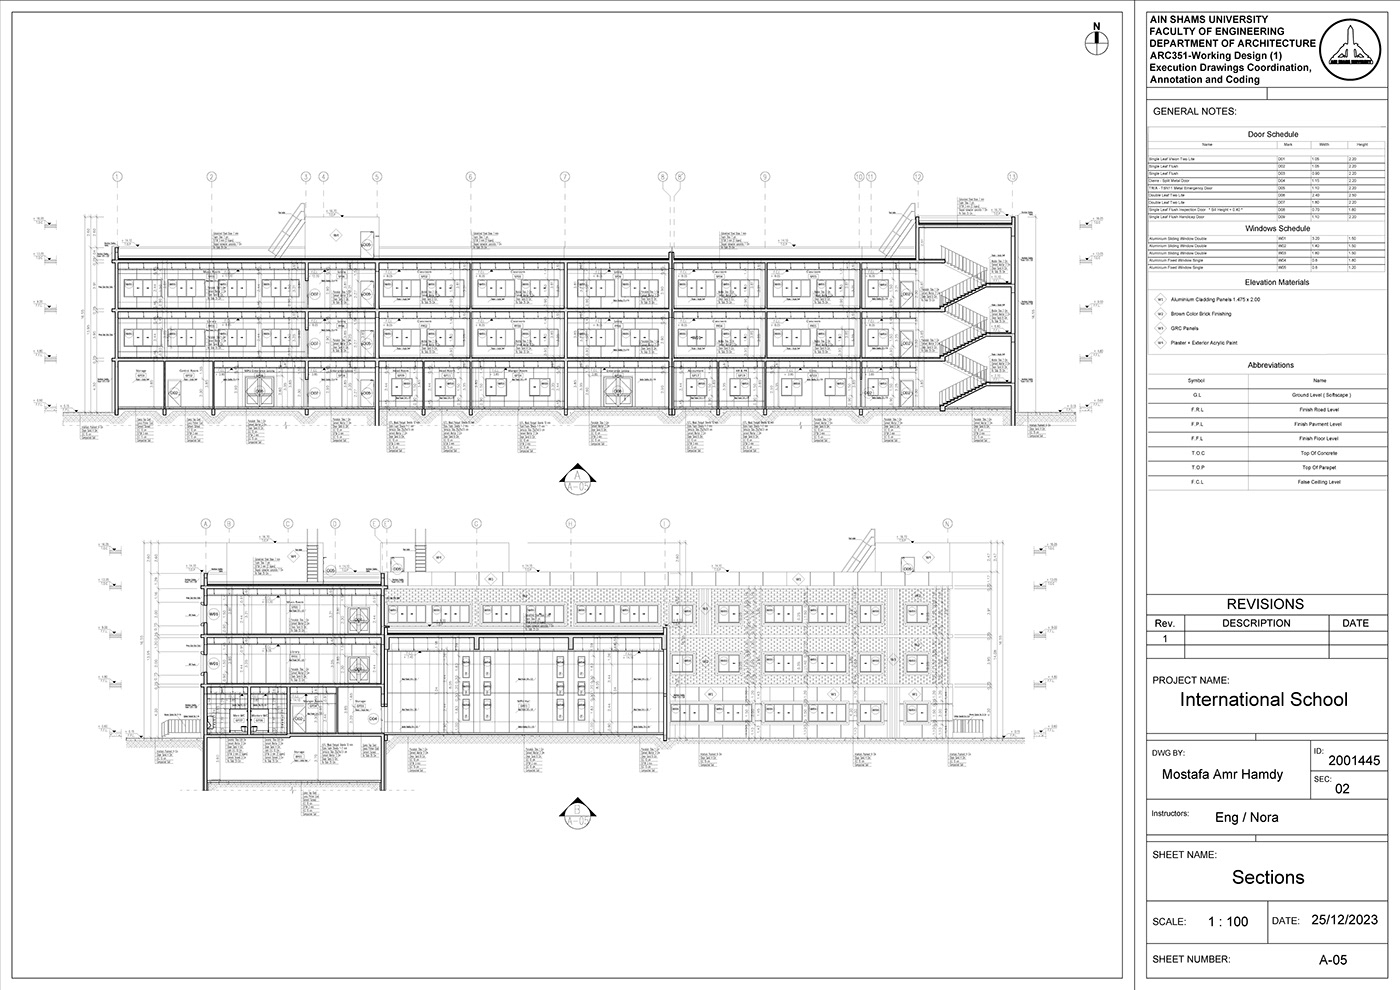 working drawings architecture construction details school execution drawings AutoCAD revit BIM technical drawing